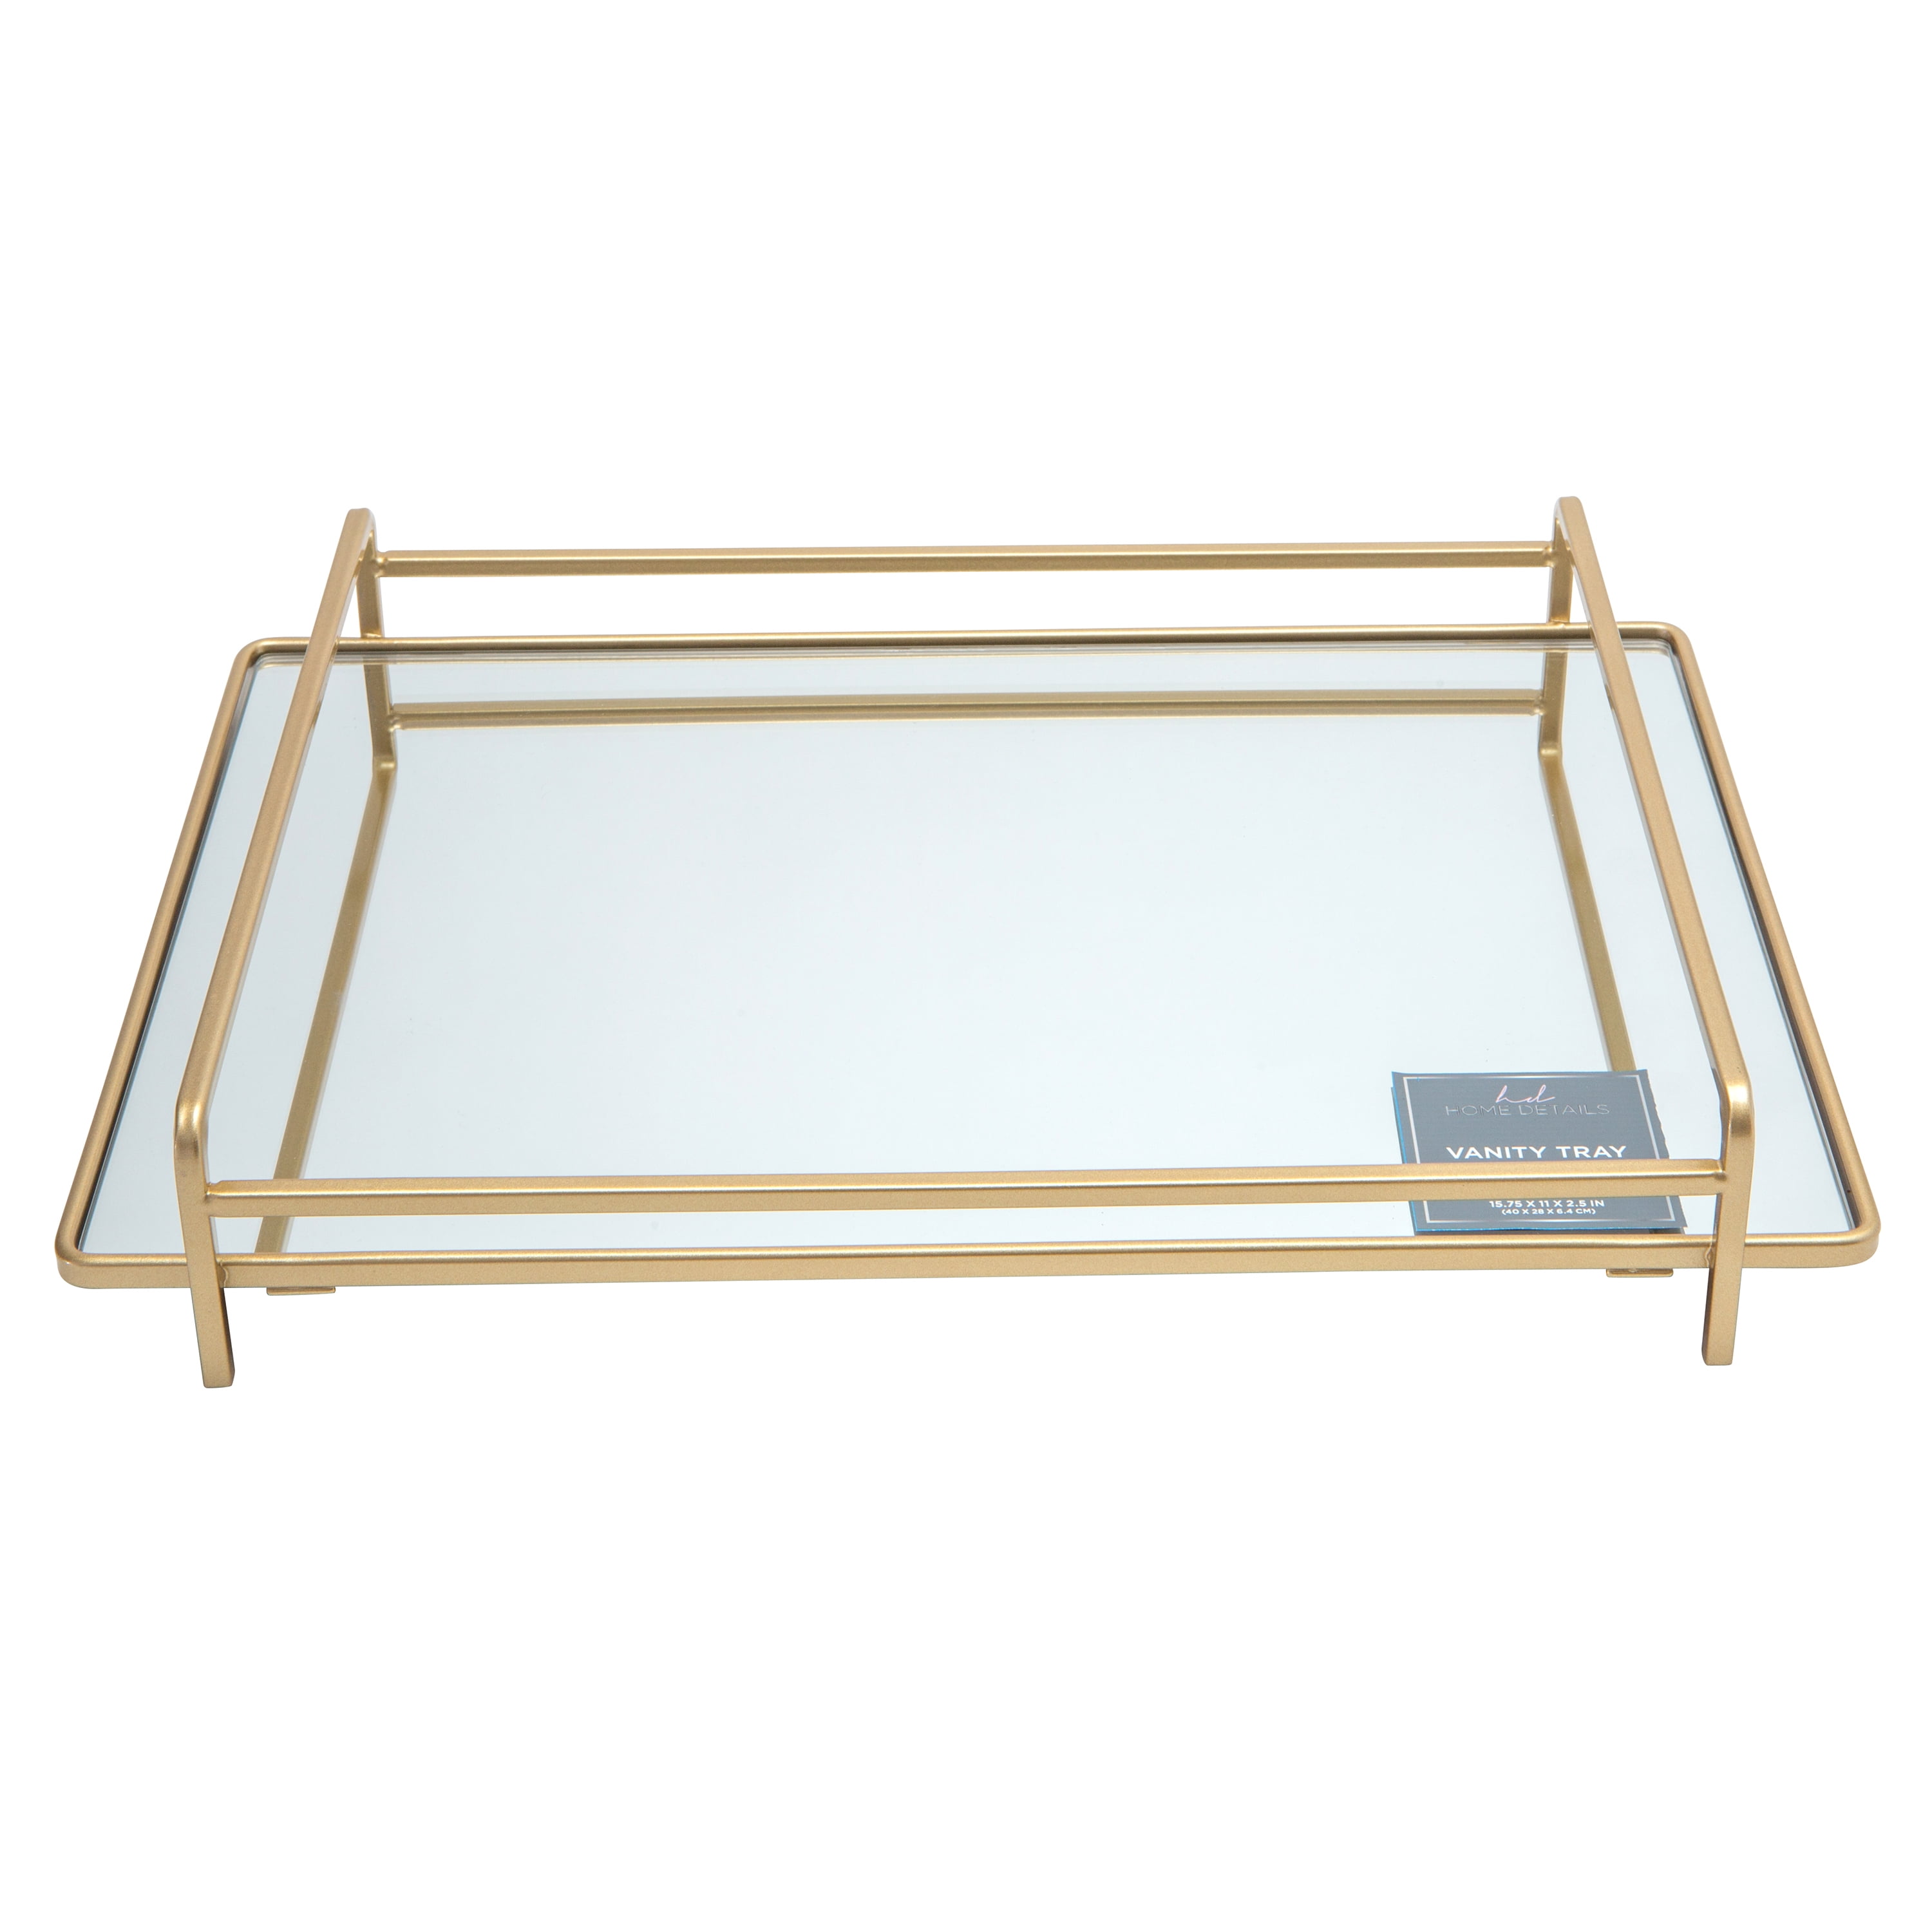 Home Details 4 Rail Vanity Mirror Tray, Large Geometric Mirrored Vanity Tray Gold Home Details